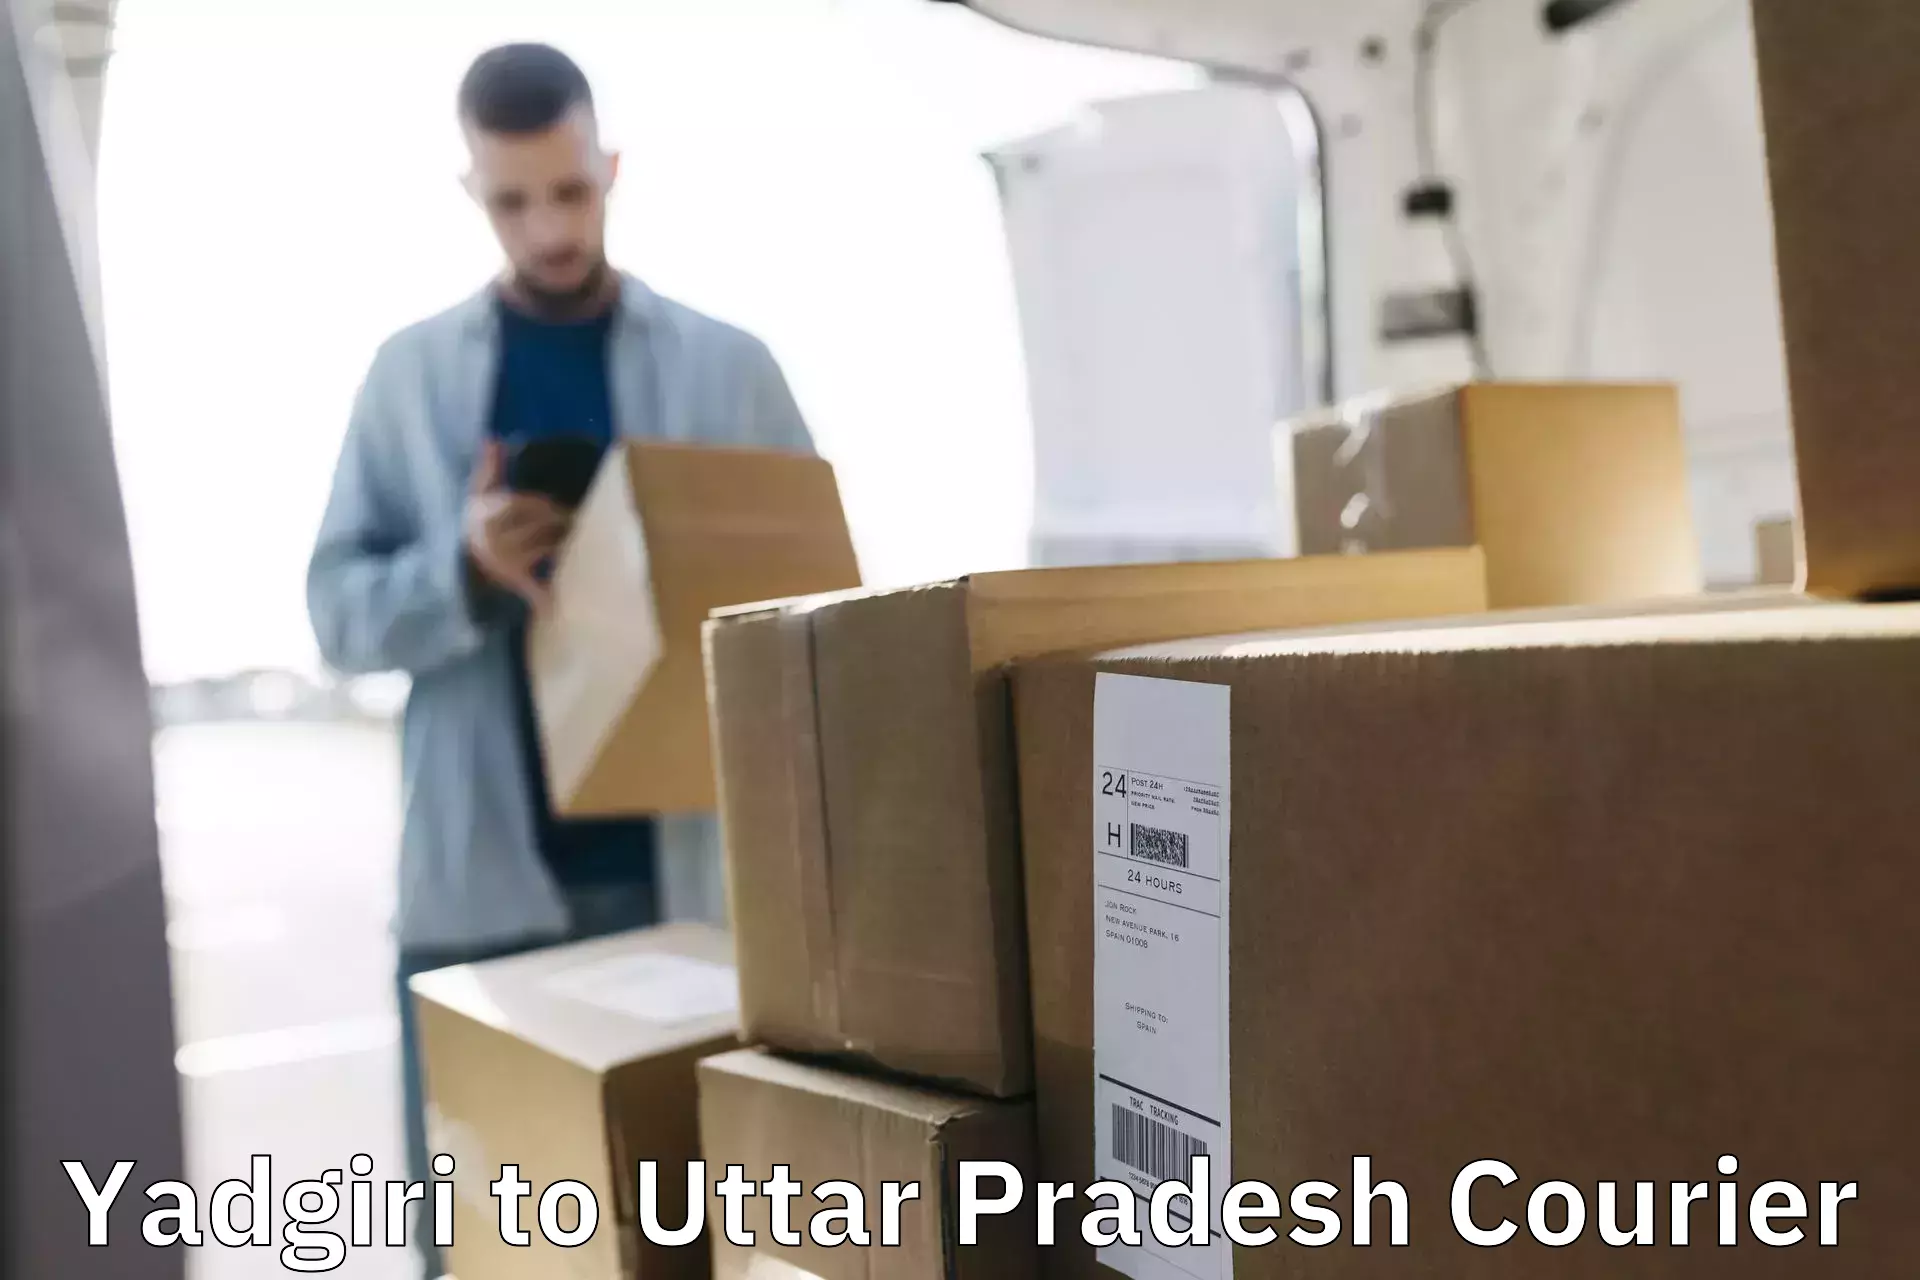 Affordable parcel service Yadgiri to Lalitpur